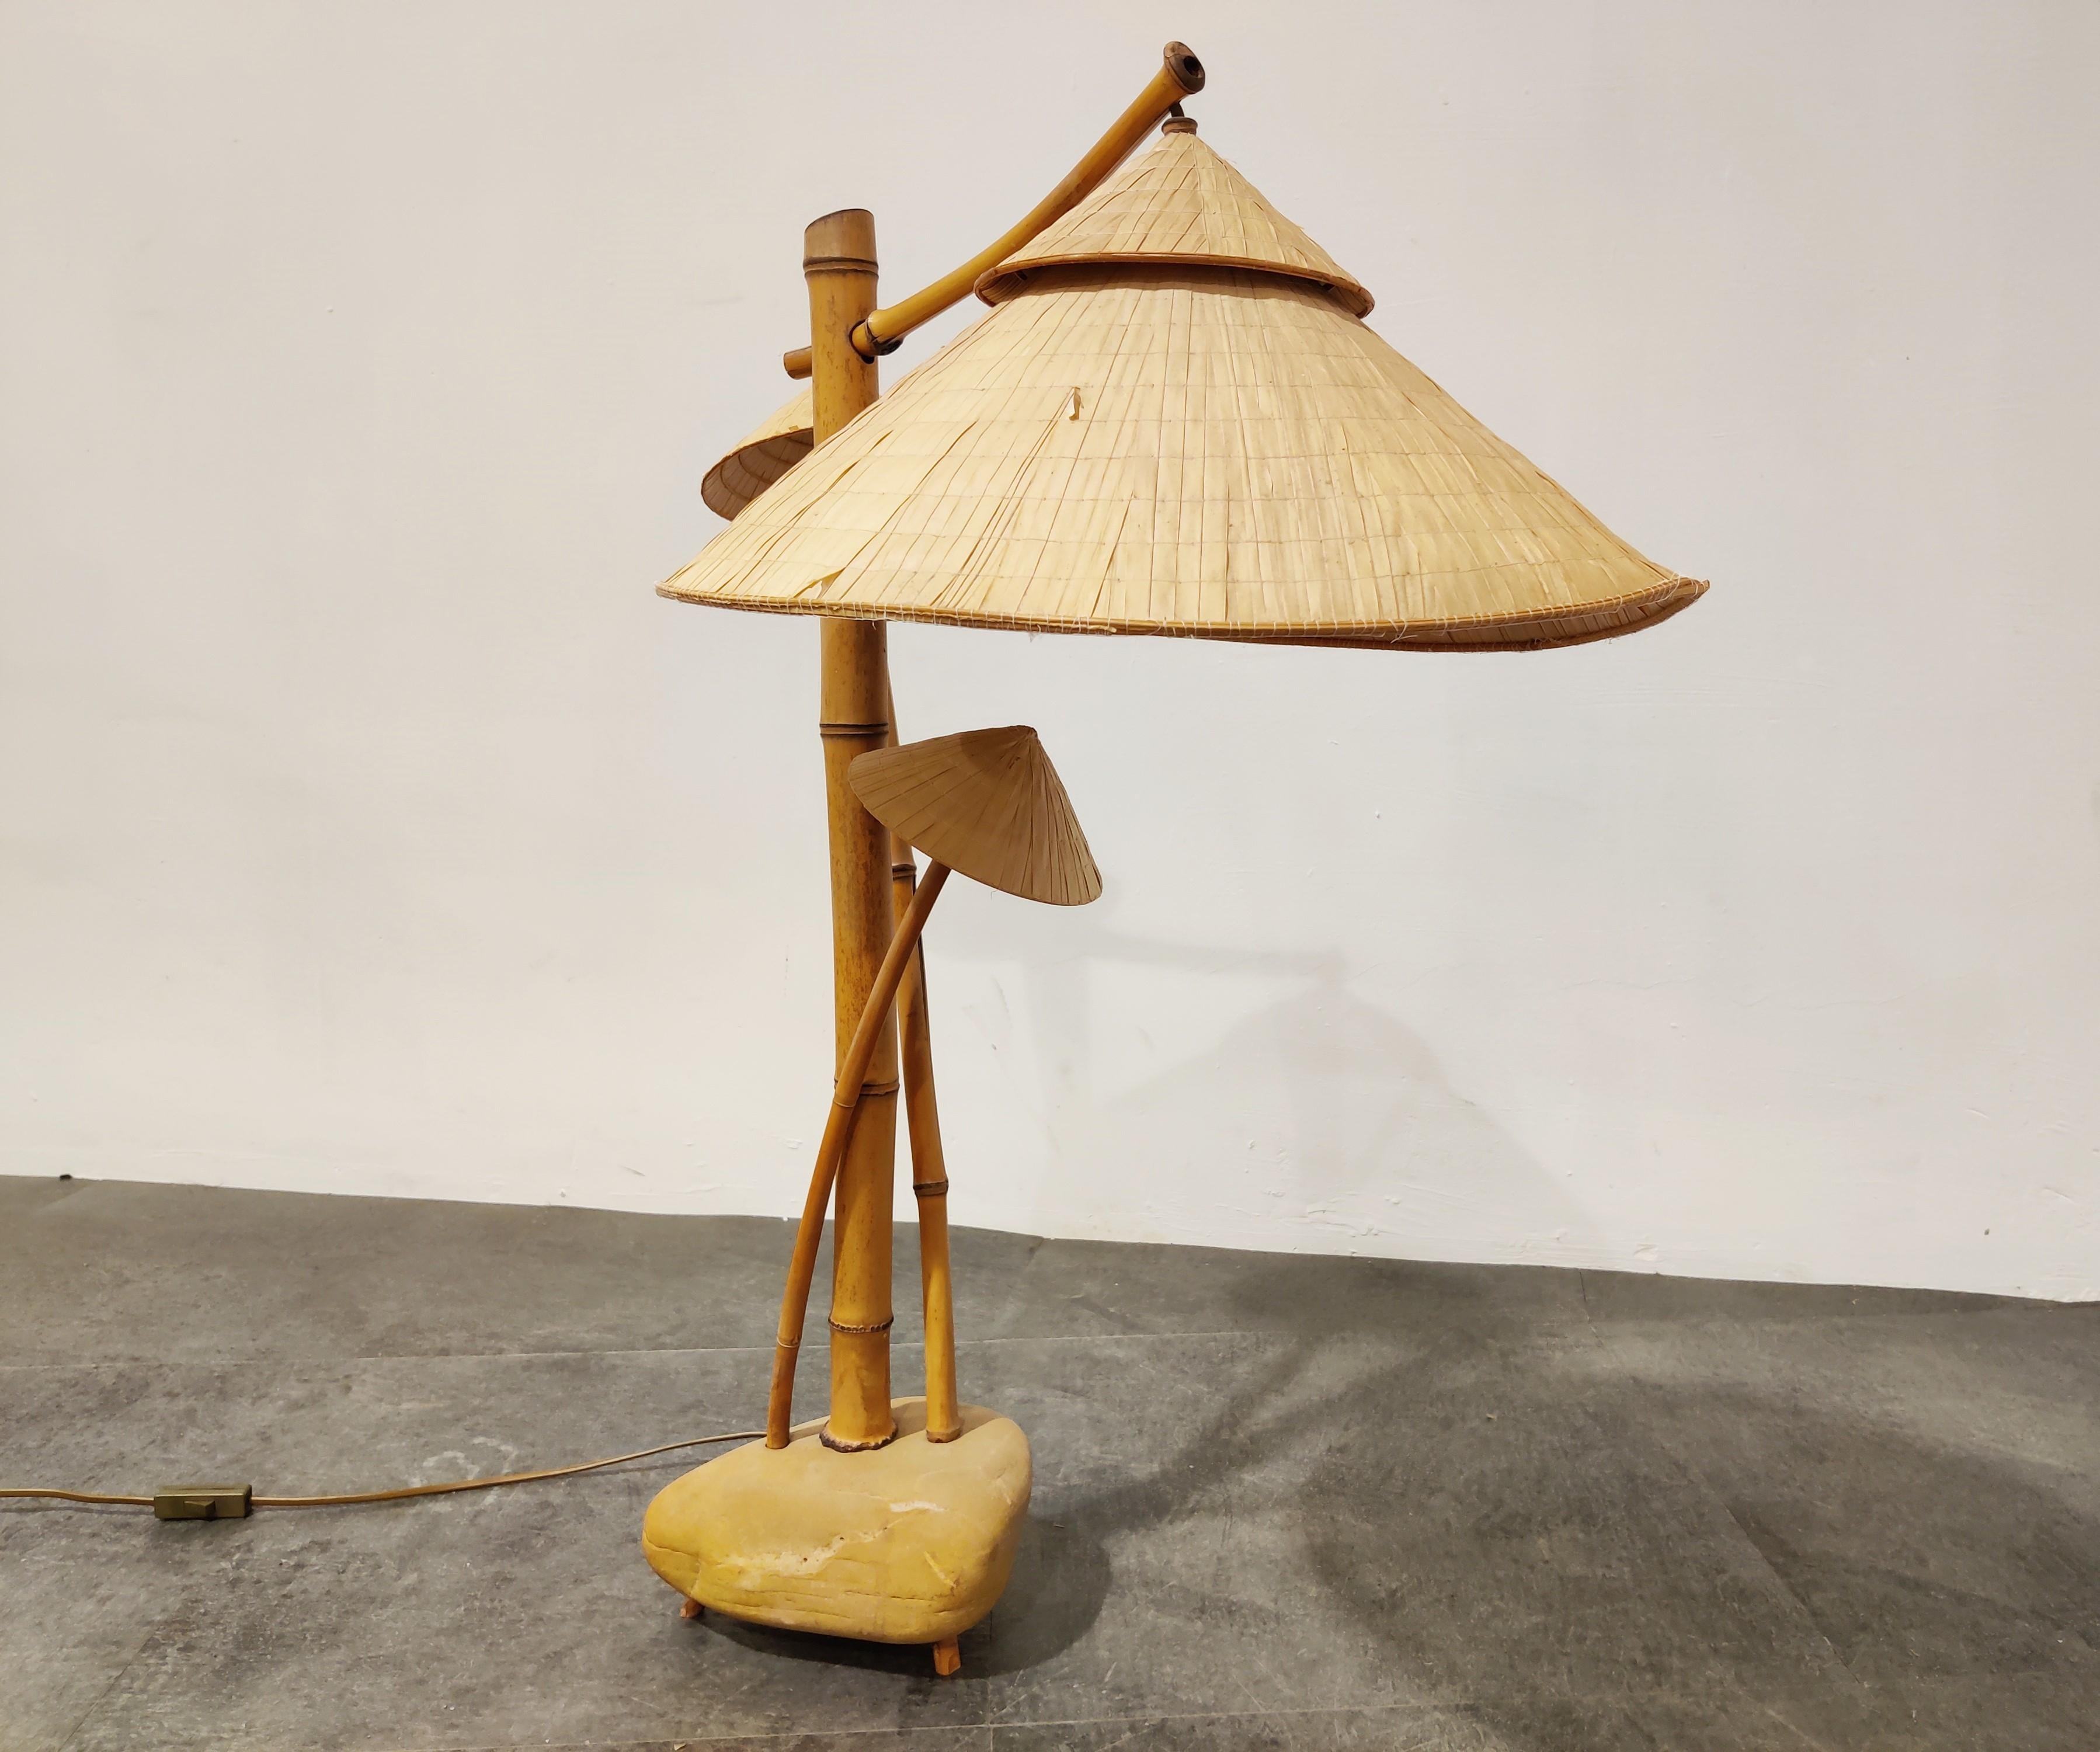 Unique bamboo table lamp with rice paper shades mounted on a clay base.

Lovely design and the lamp emits a beautiful dim light. 

1980s, Japan

Dimensions:
Height 80cm/31.49